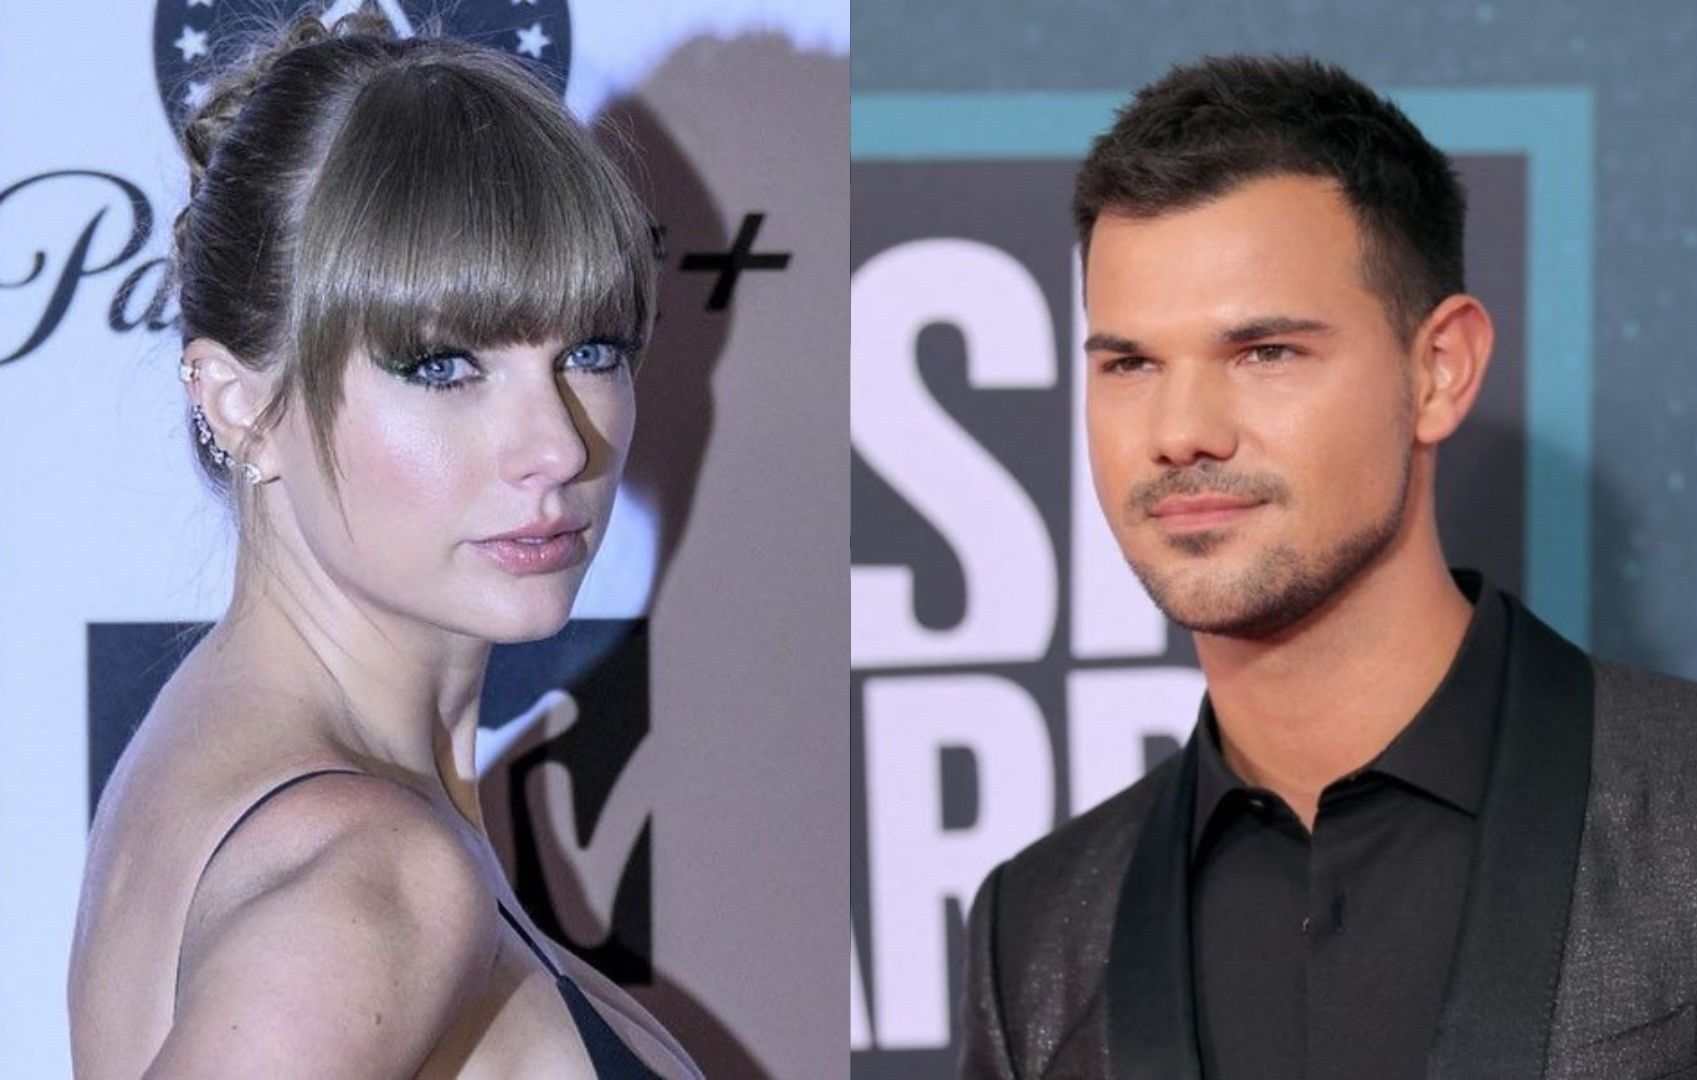 Taylor Lautner confirms Taylor Swift ended their relationship, now 'rekindling' friendship